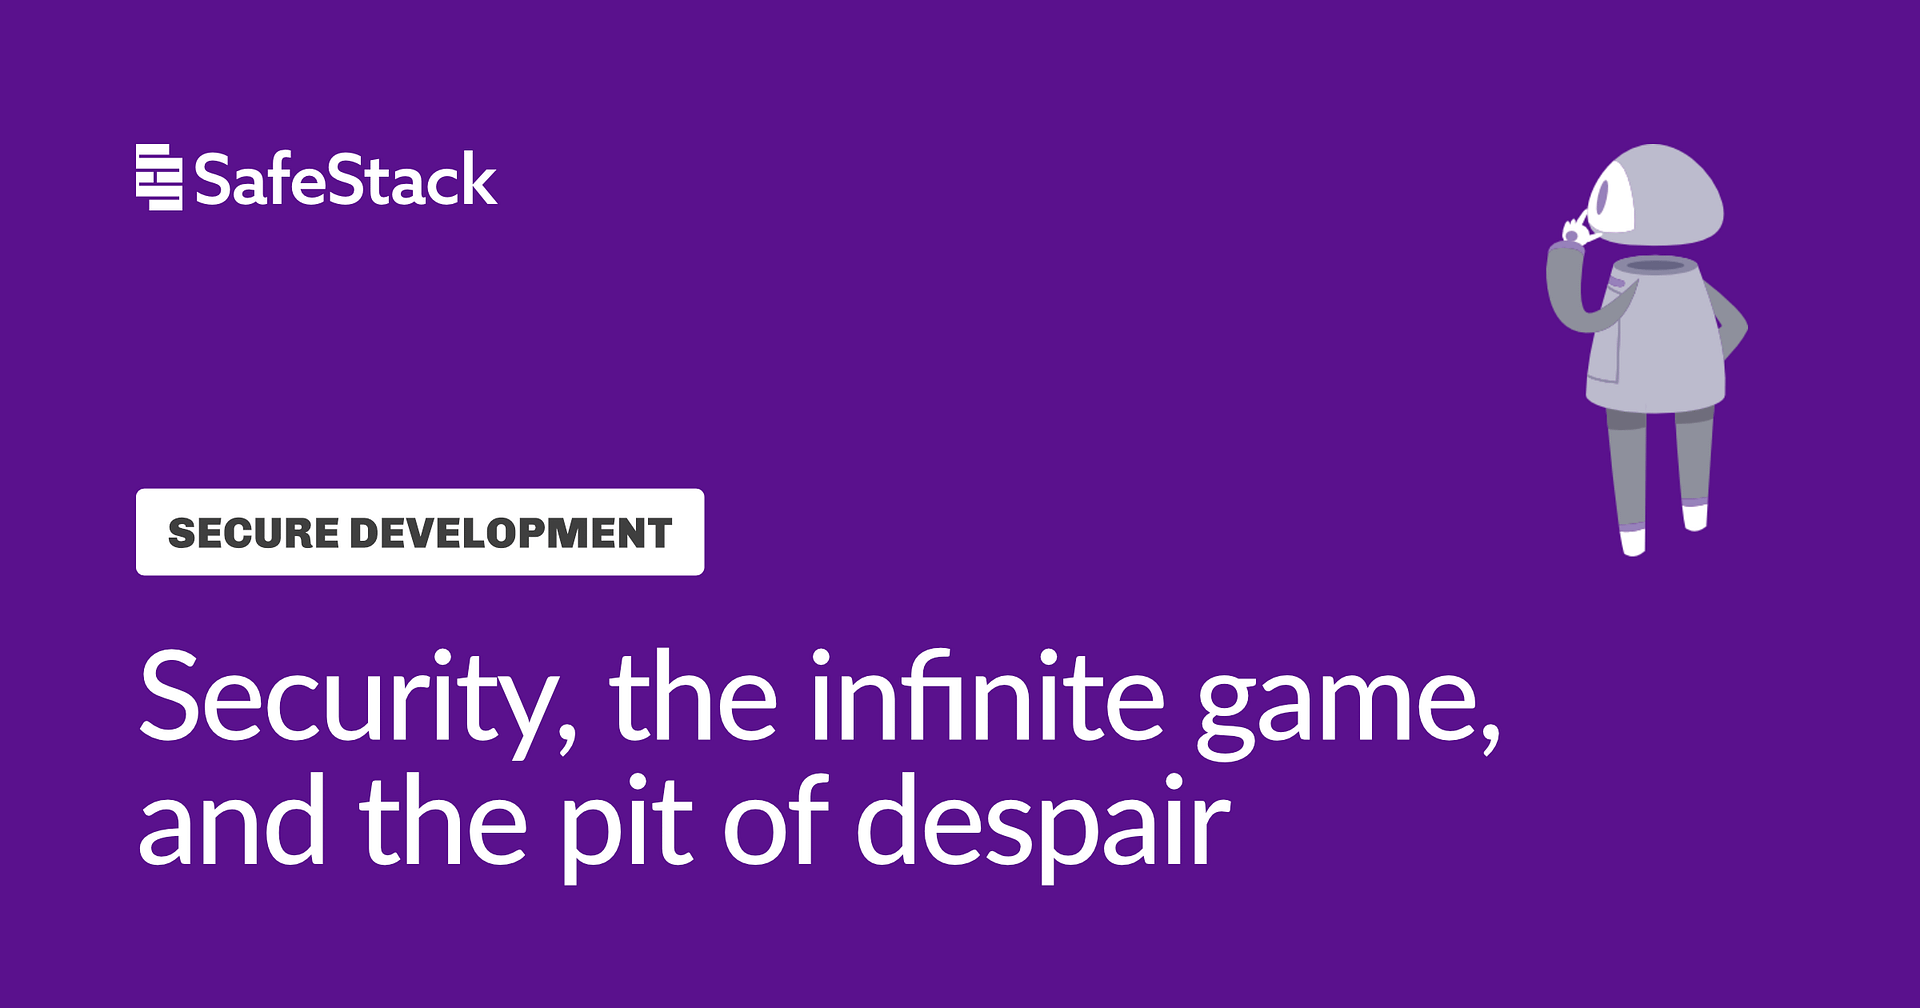 "Security, the infinite game, and the pit of despair" title with SafeStack mascot image